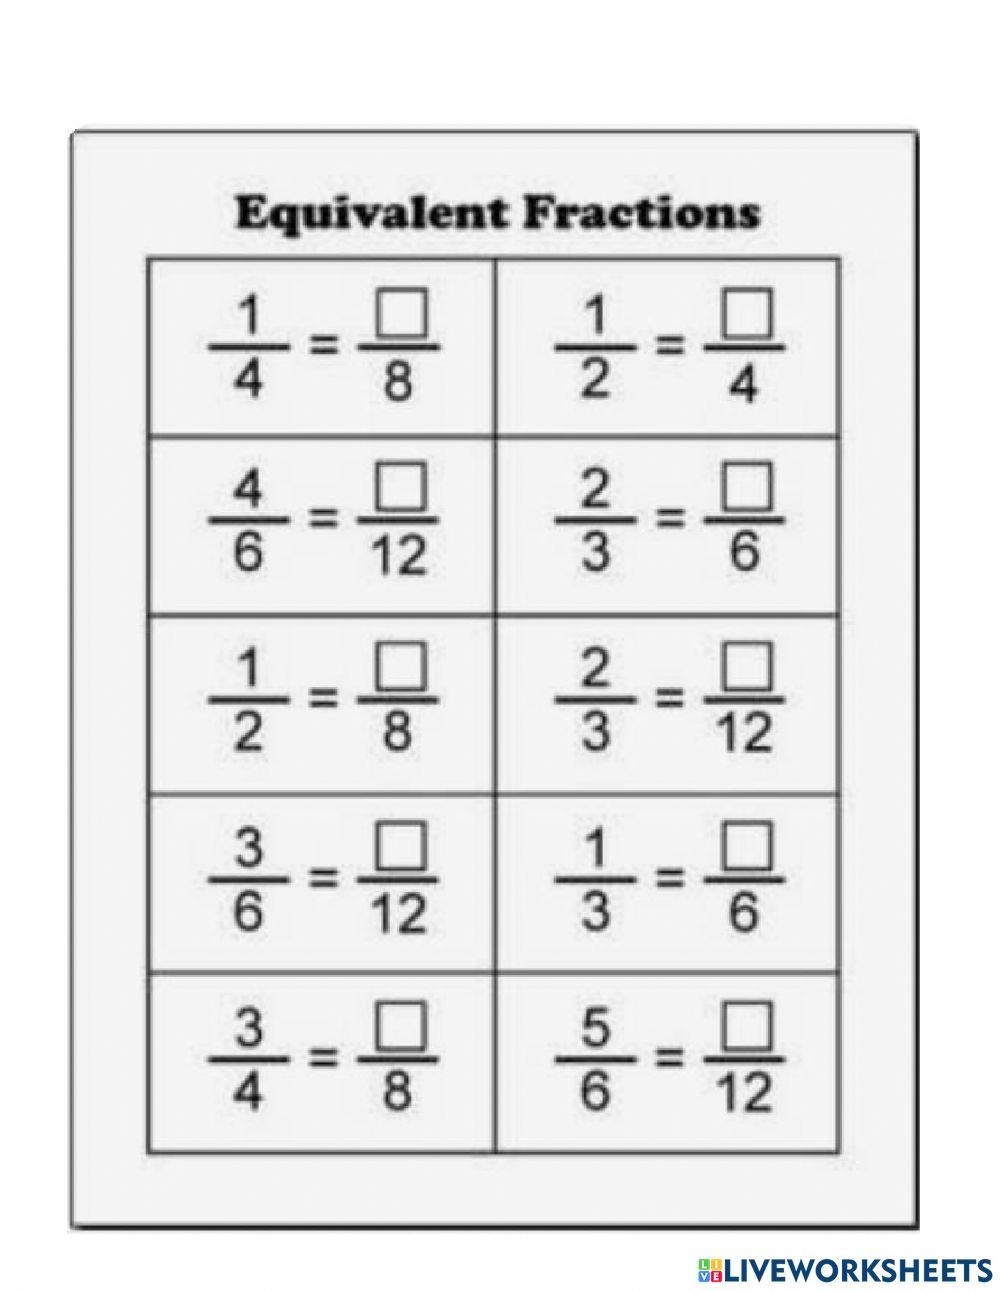 Equivalent Fractions G3